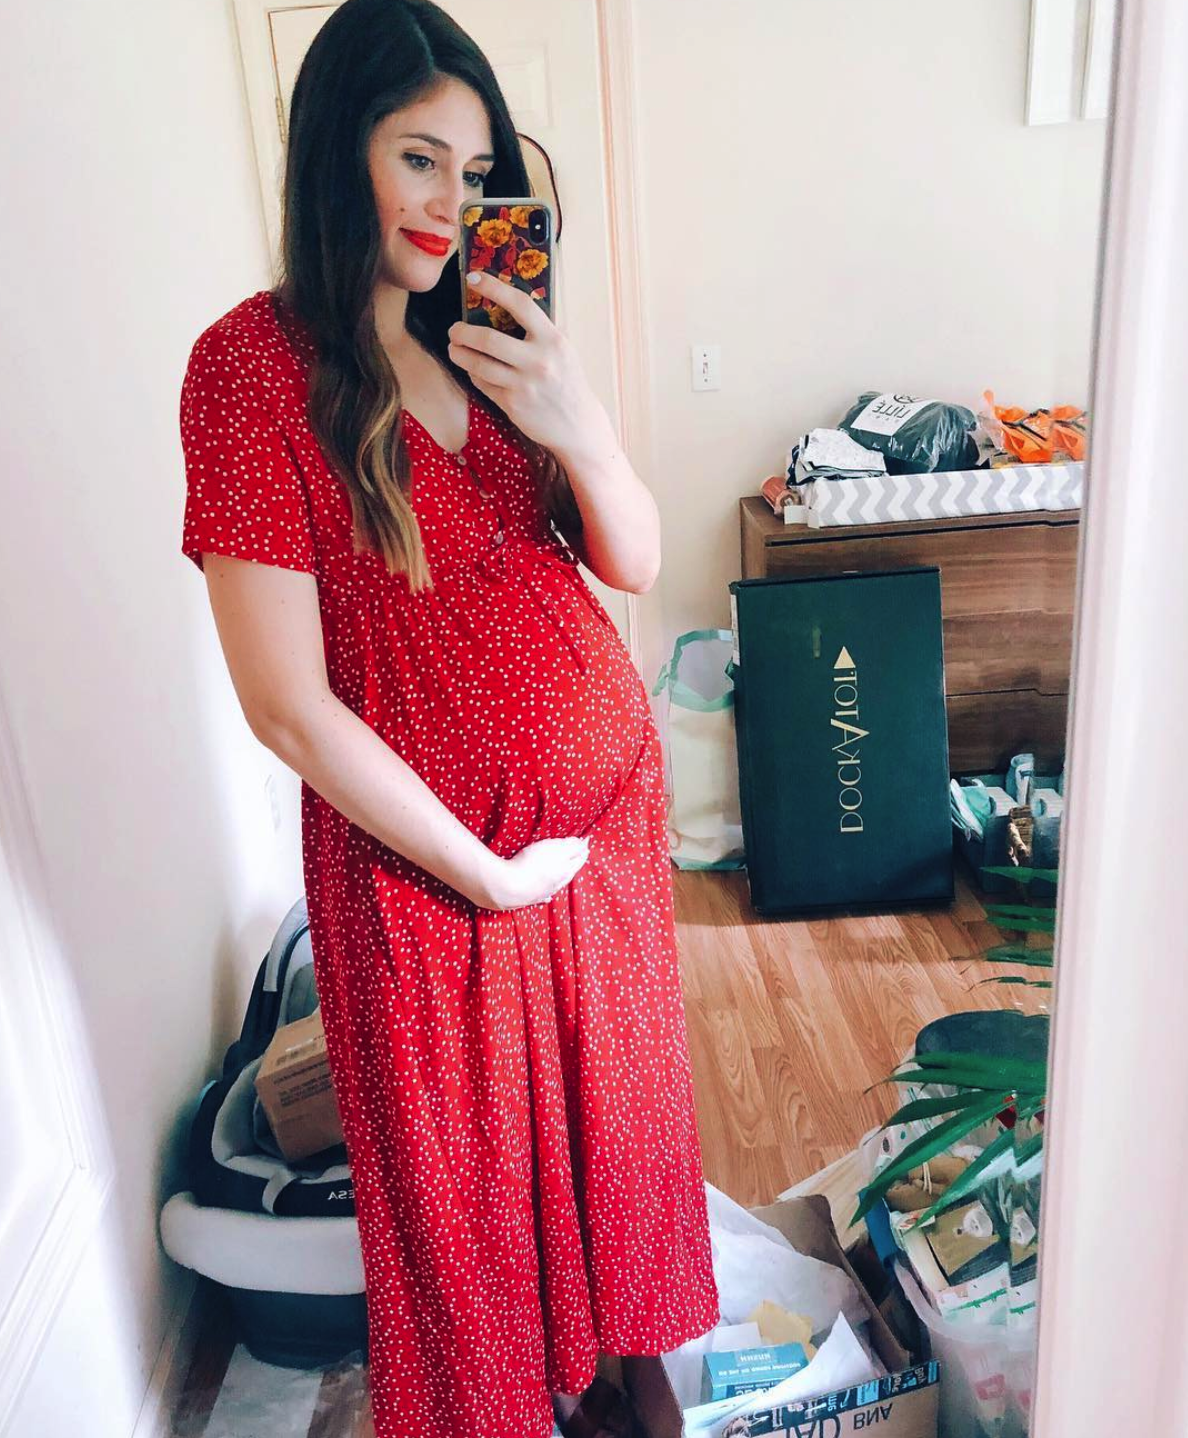 Styling Your Baby Bump For The Third Trimester